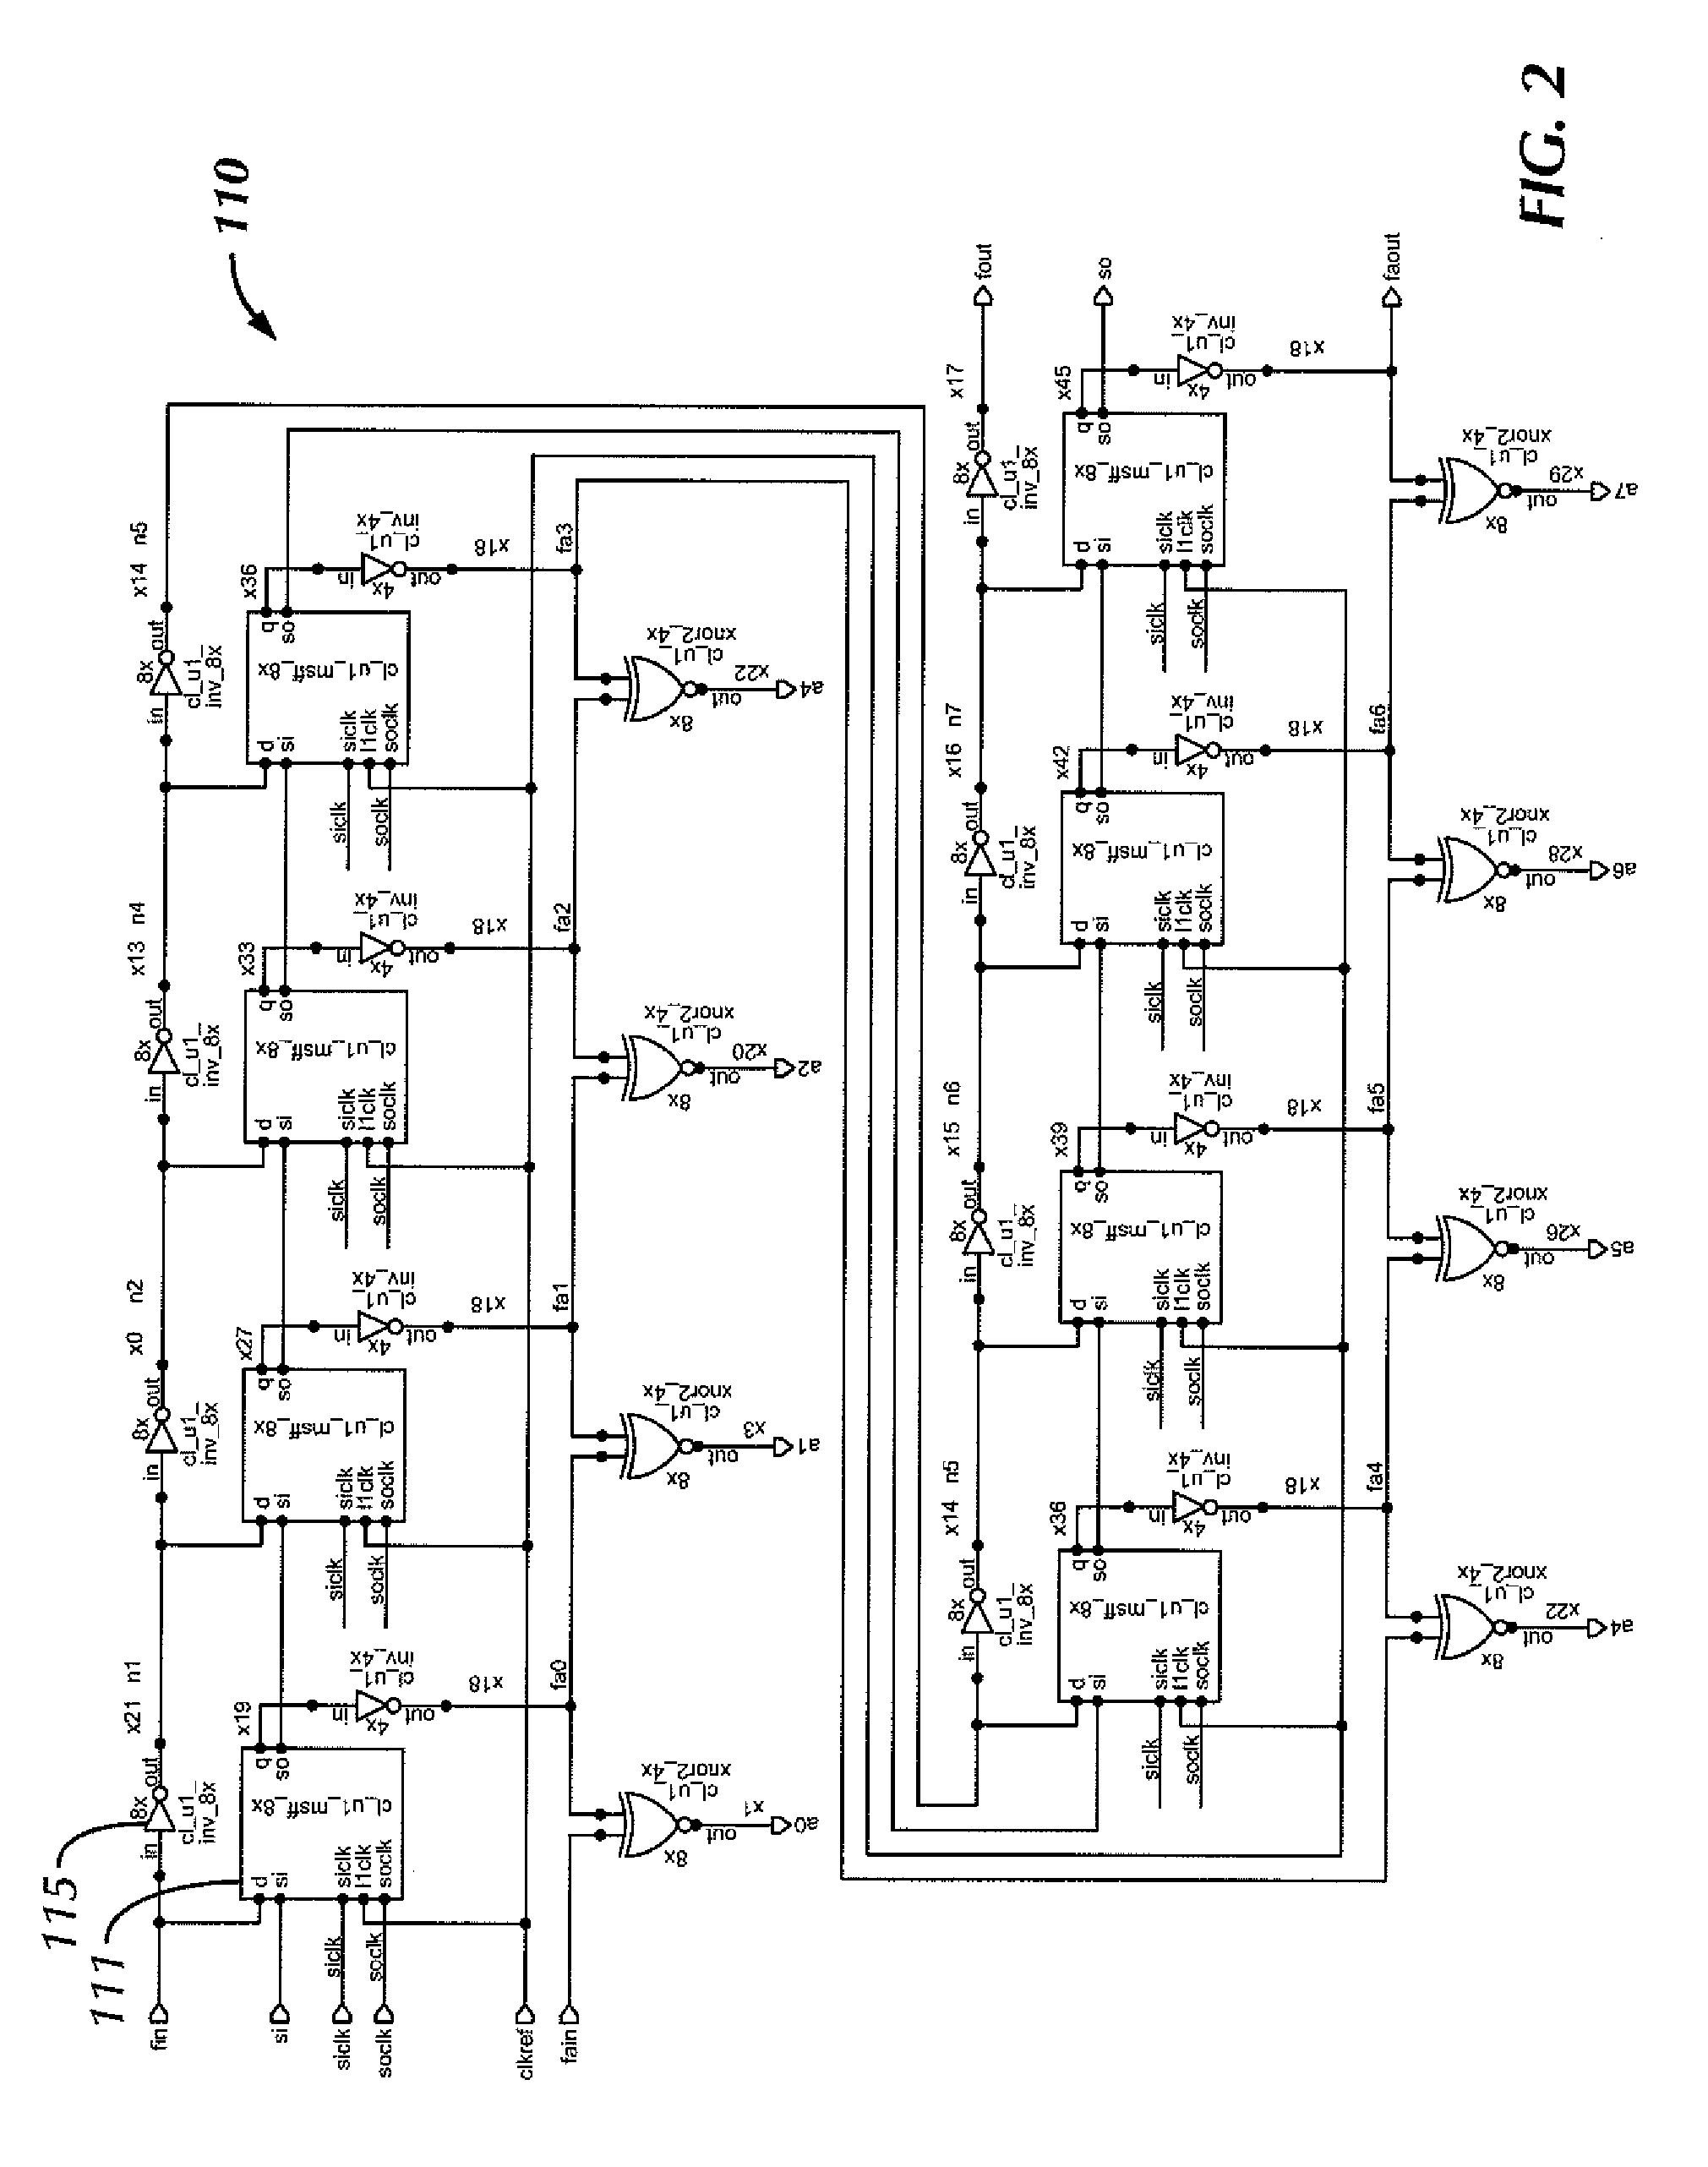 Microprocessor performance and power optimization through inductive voltage droop monitoring and correction